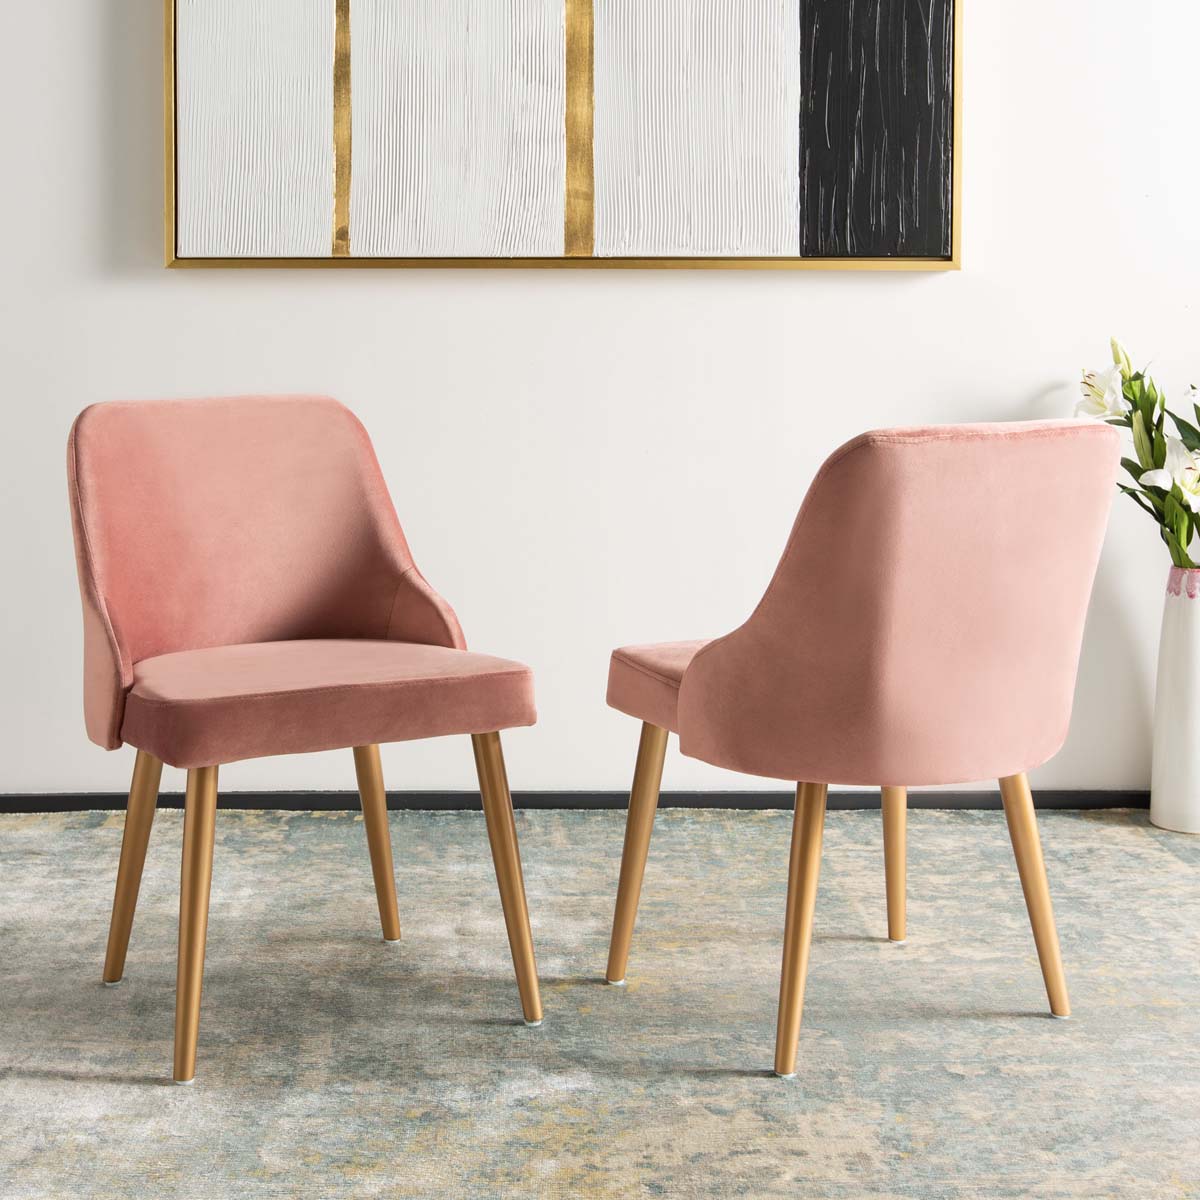 Safavieh Lulu Upholstered Dining Chair, DCH6200 - Dusty Rose/Gold (Set of 2)